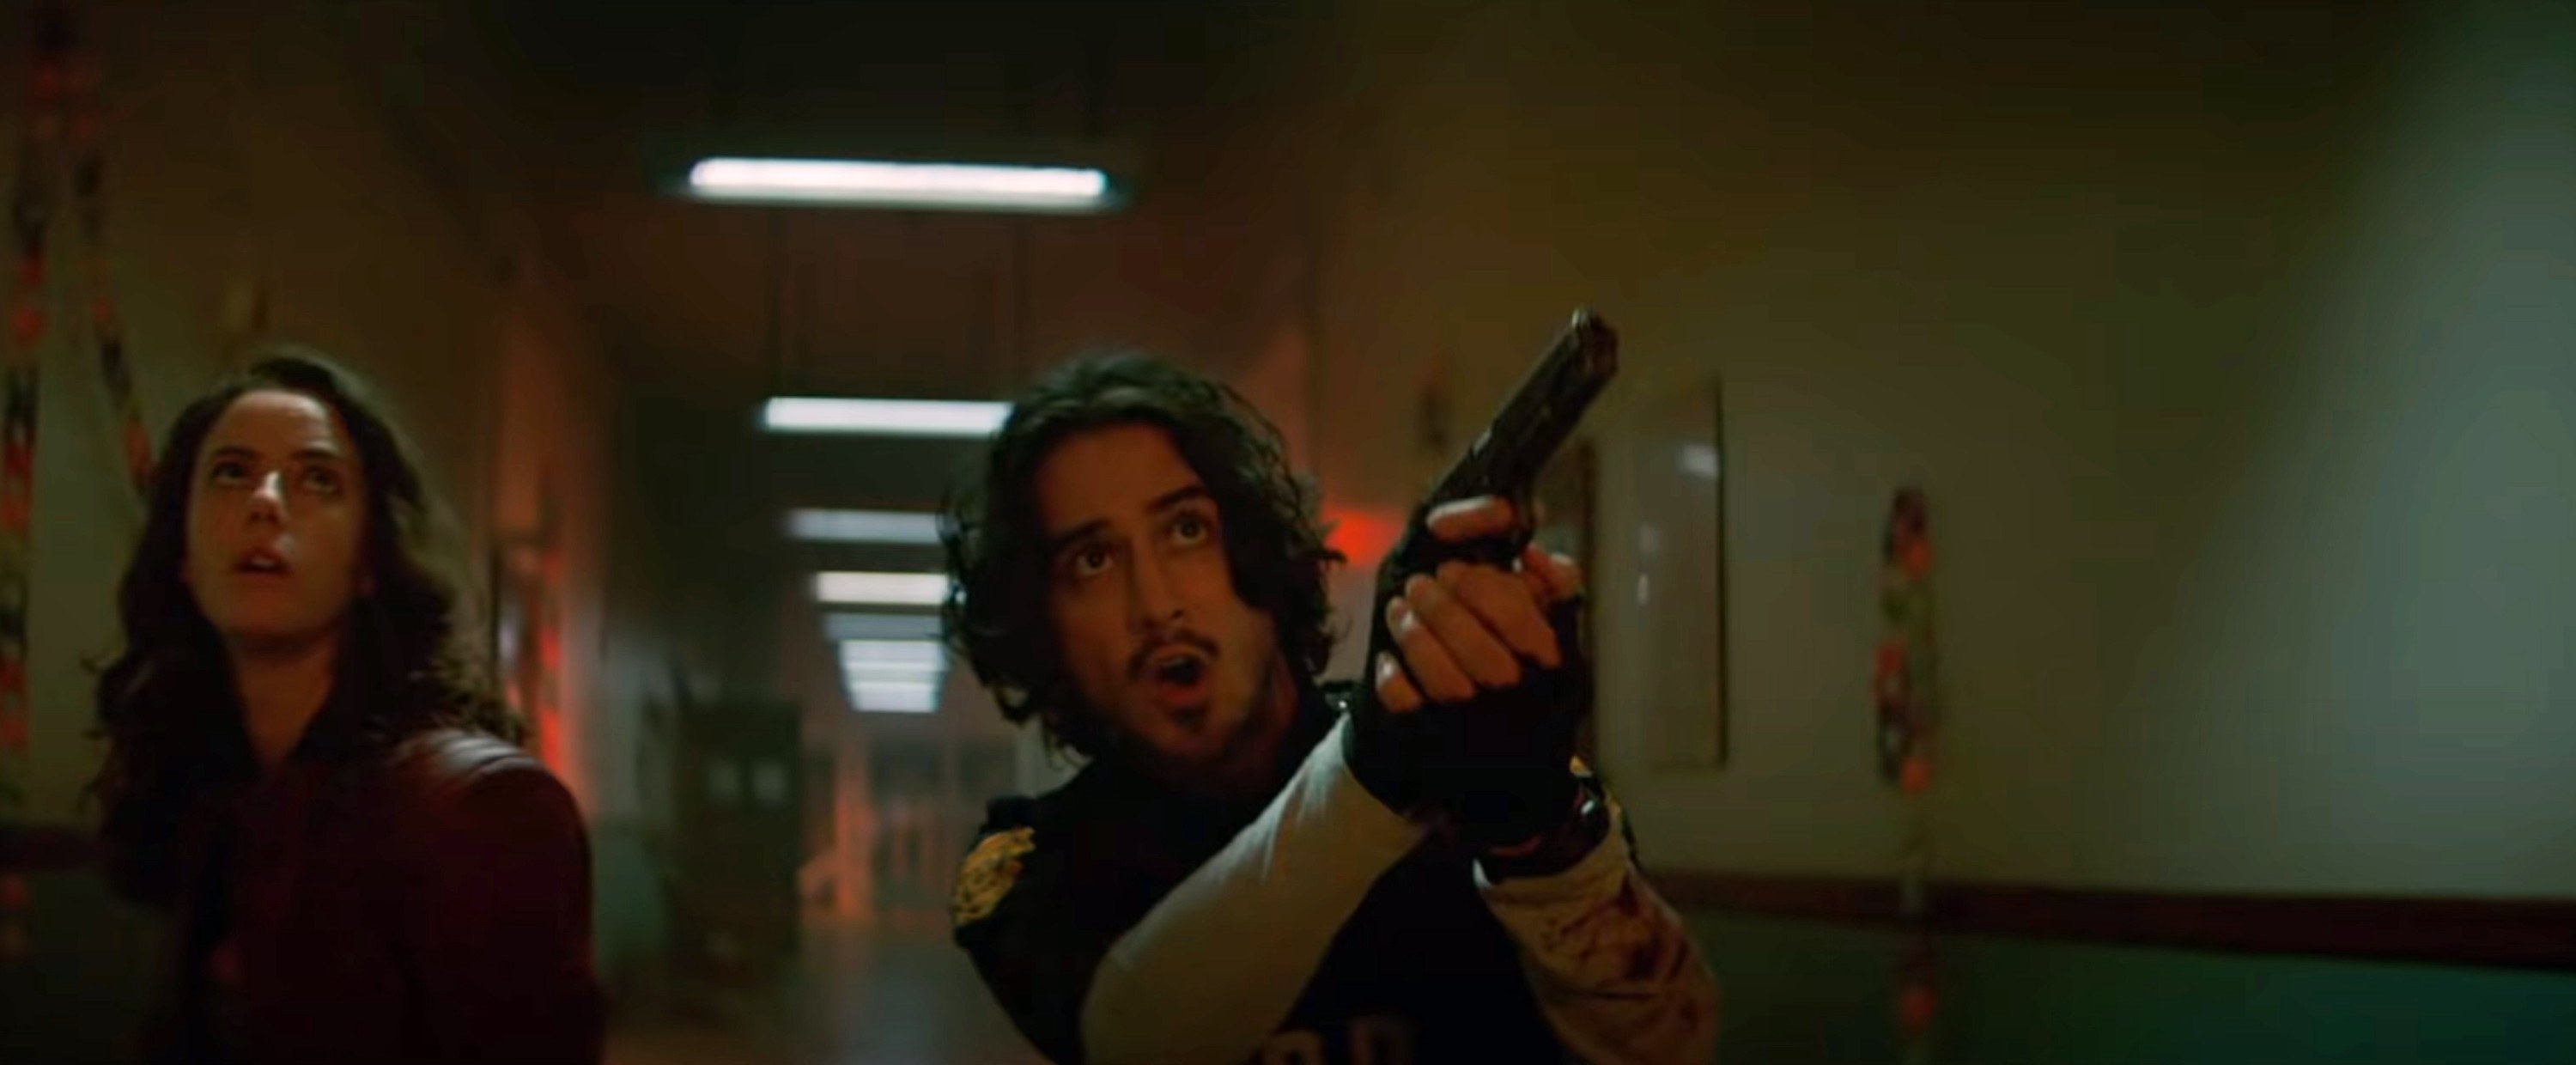 Avan pointing a gun in a scene from Resident Evil